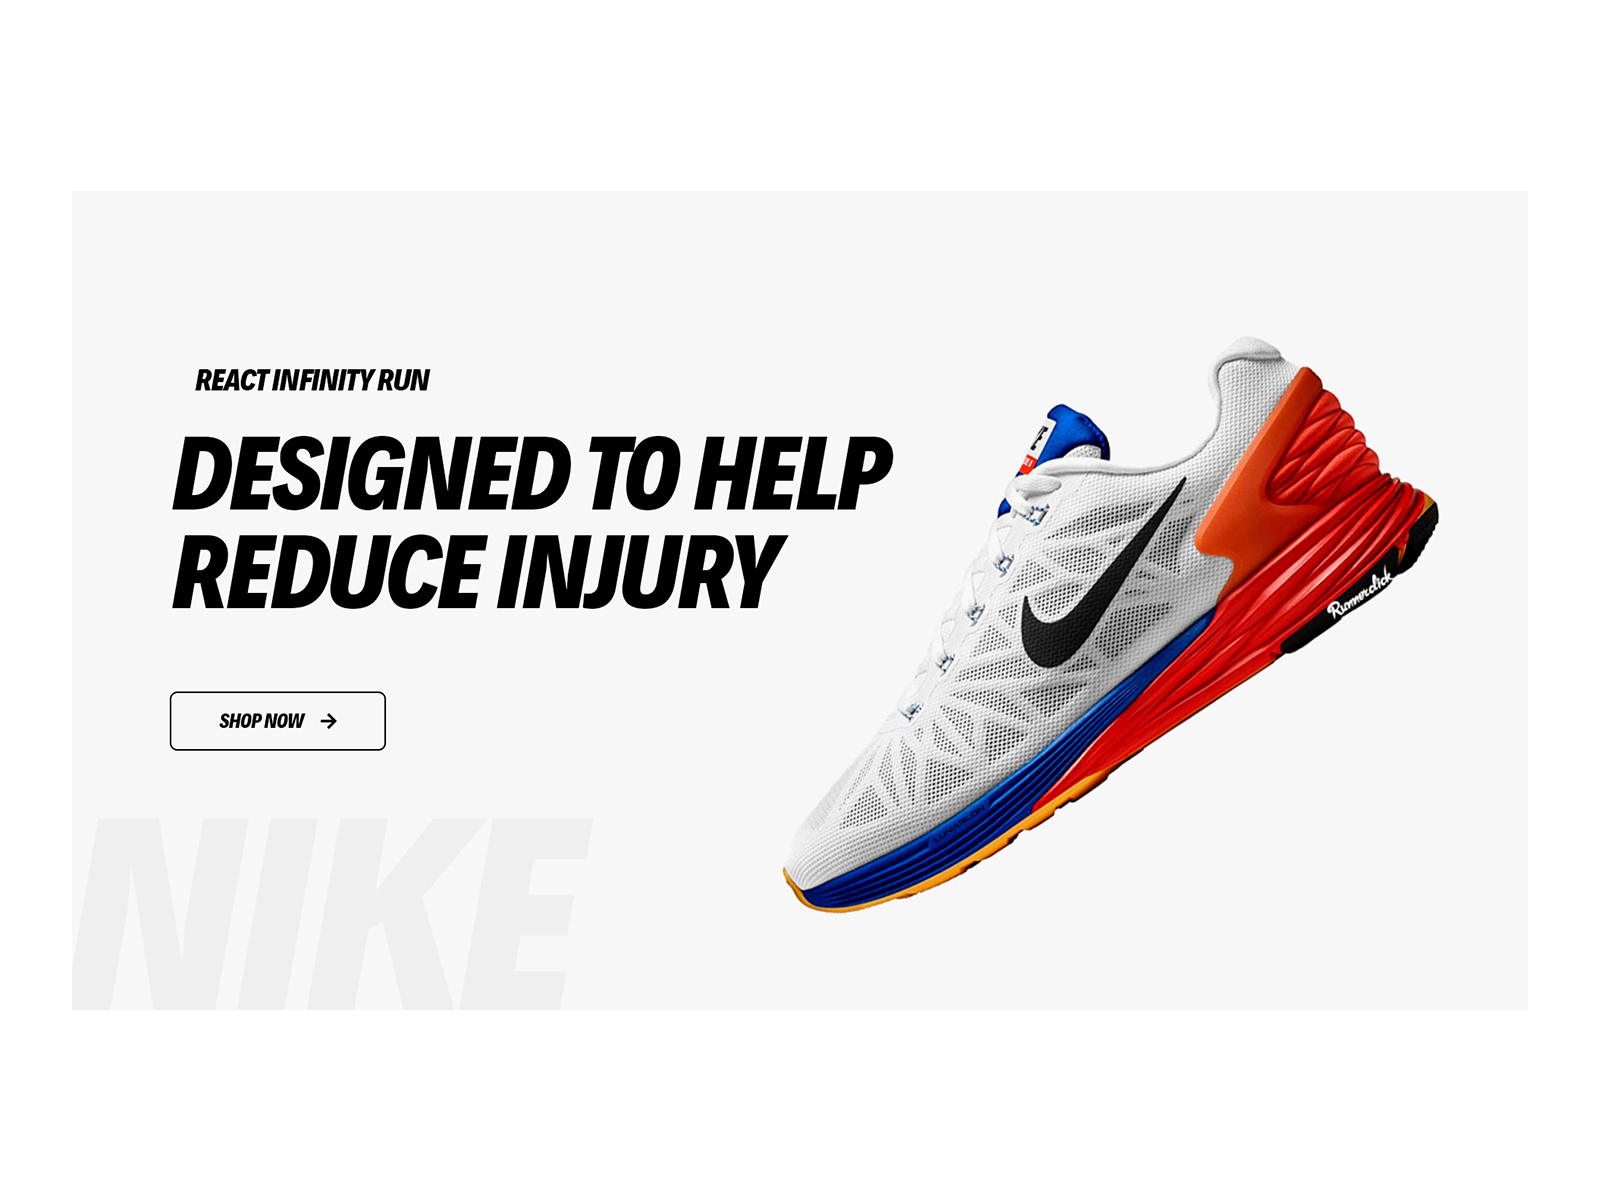 NIKE banners by Shahzaib on Dribbble